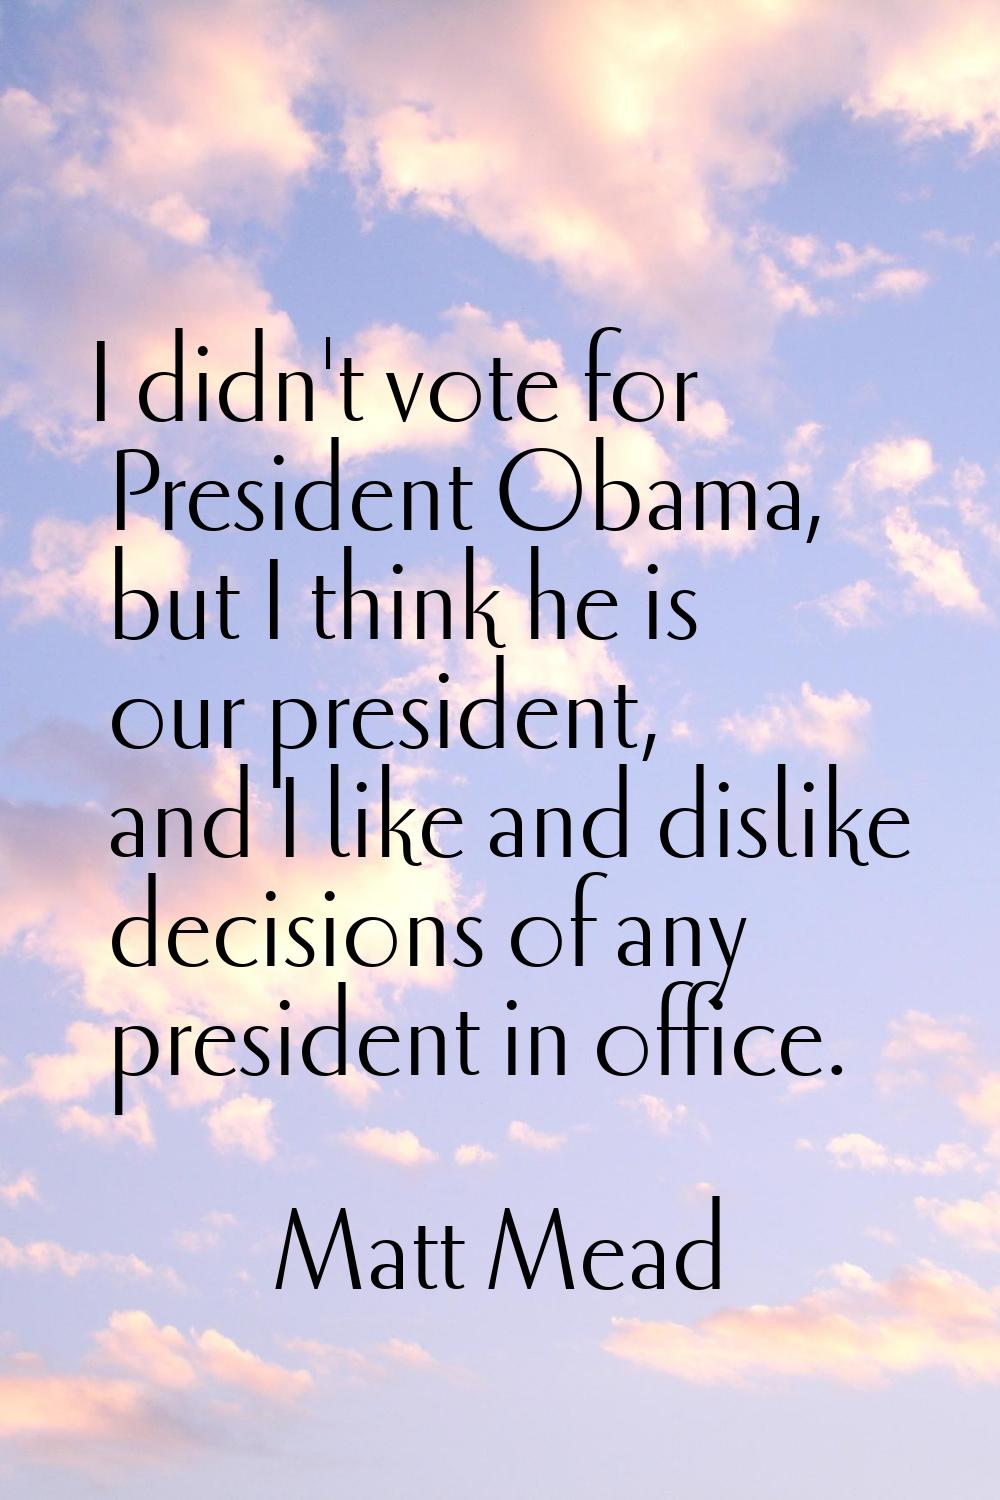 I didn't vote for President Obama, but I think he is our president, and I like and dislike decision